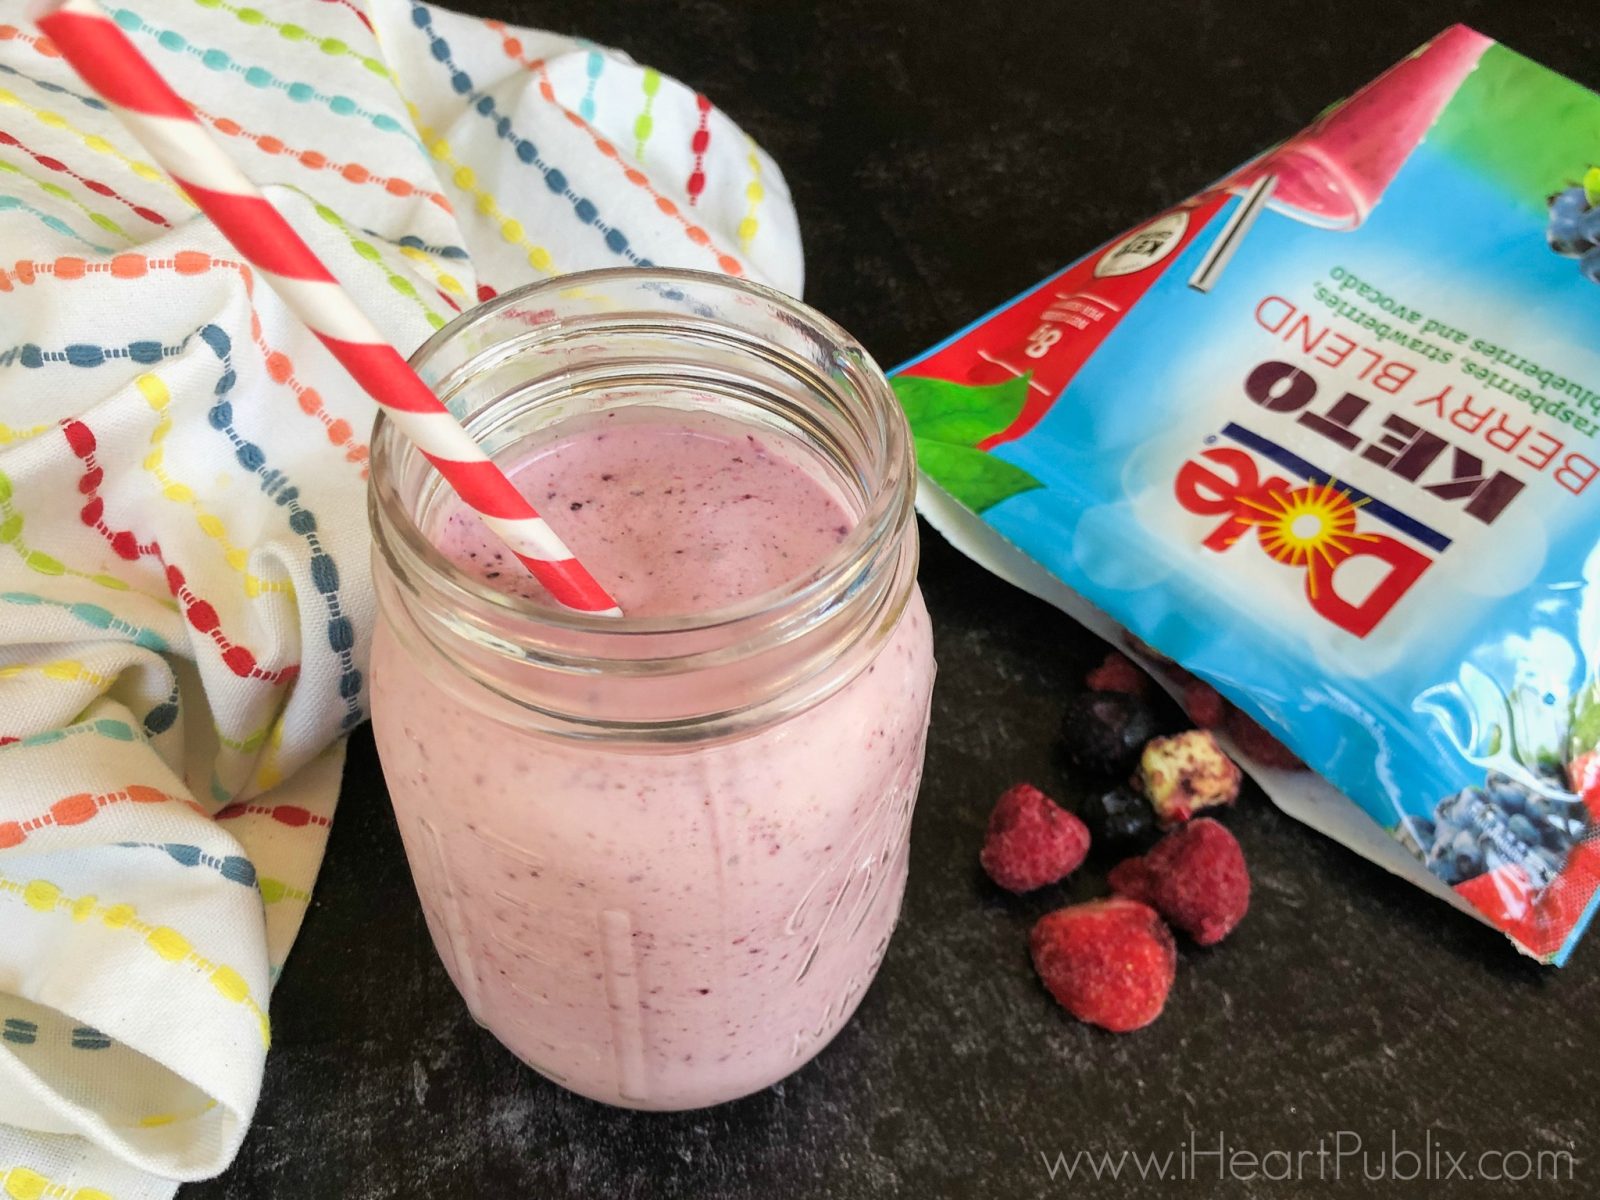 Dole® Keto Berry Cheesecake Smoothie – Tasty Option To Make With New Dole Keto Berry Blend